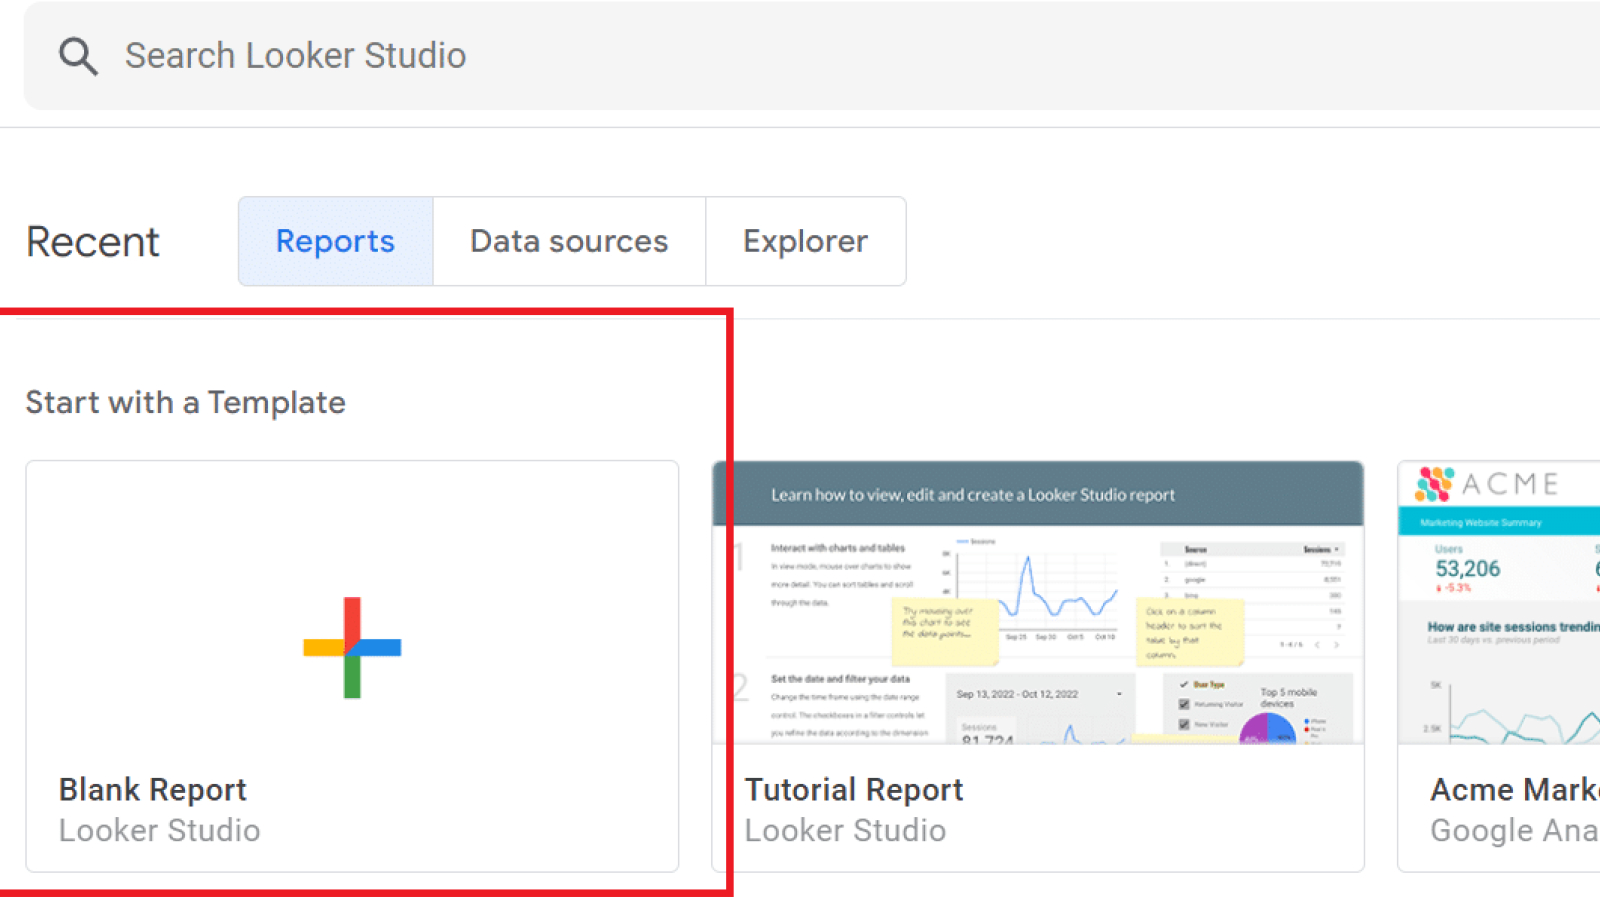 Use this Looker Studio template to track SEO performance